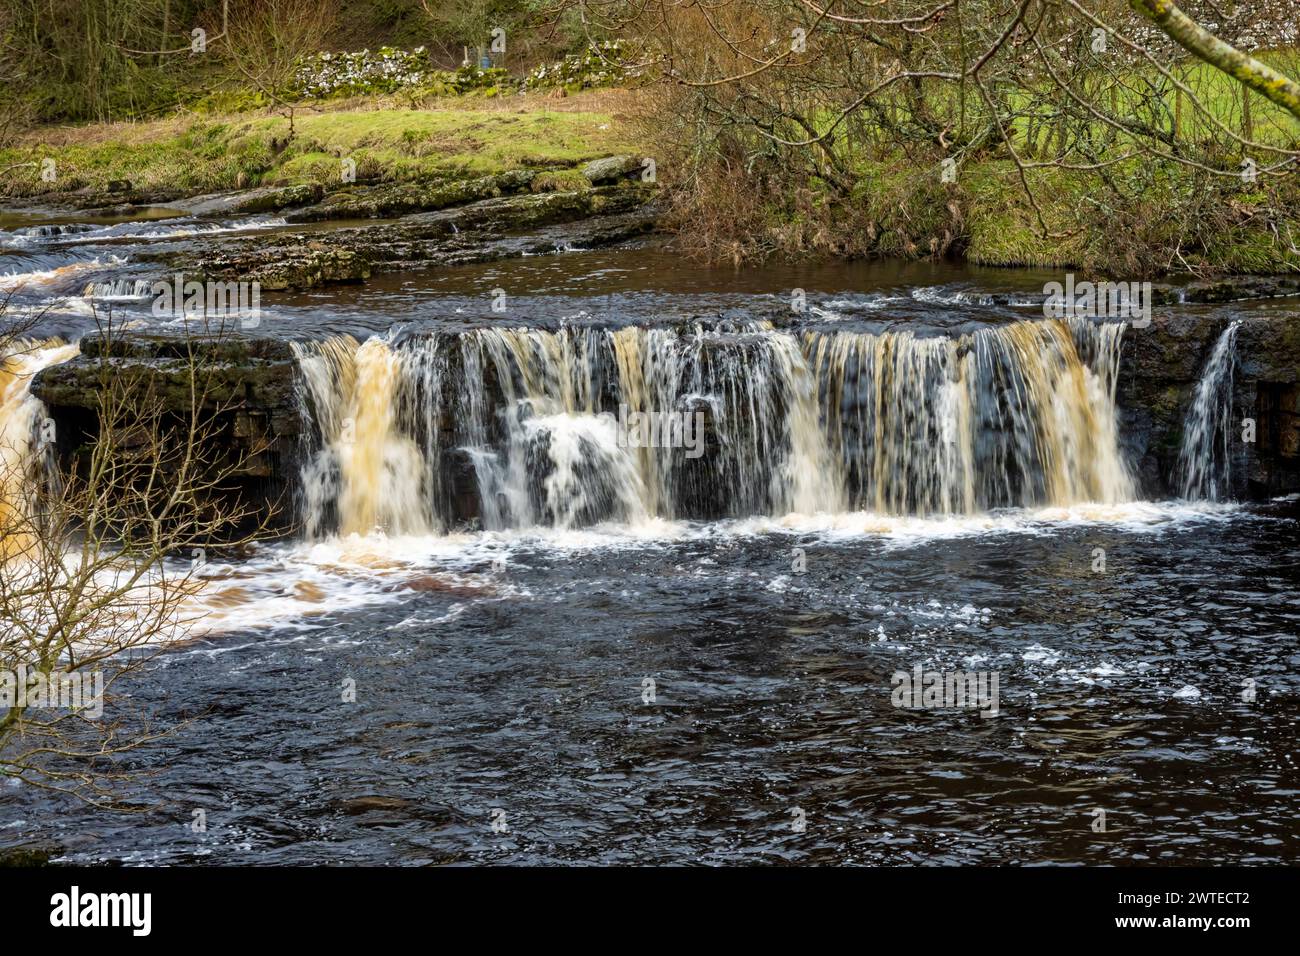 Wain Wath Force, Swaledale, Yorkshire Dales National Park. Foto Stock